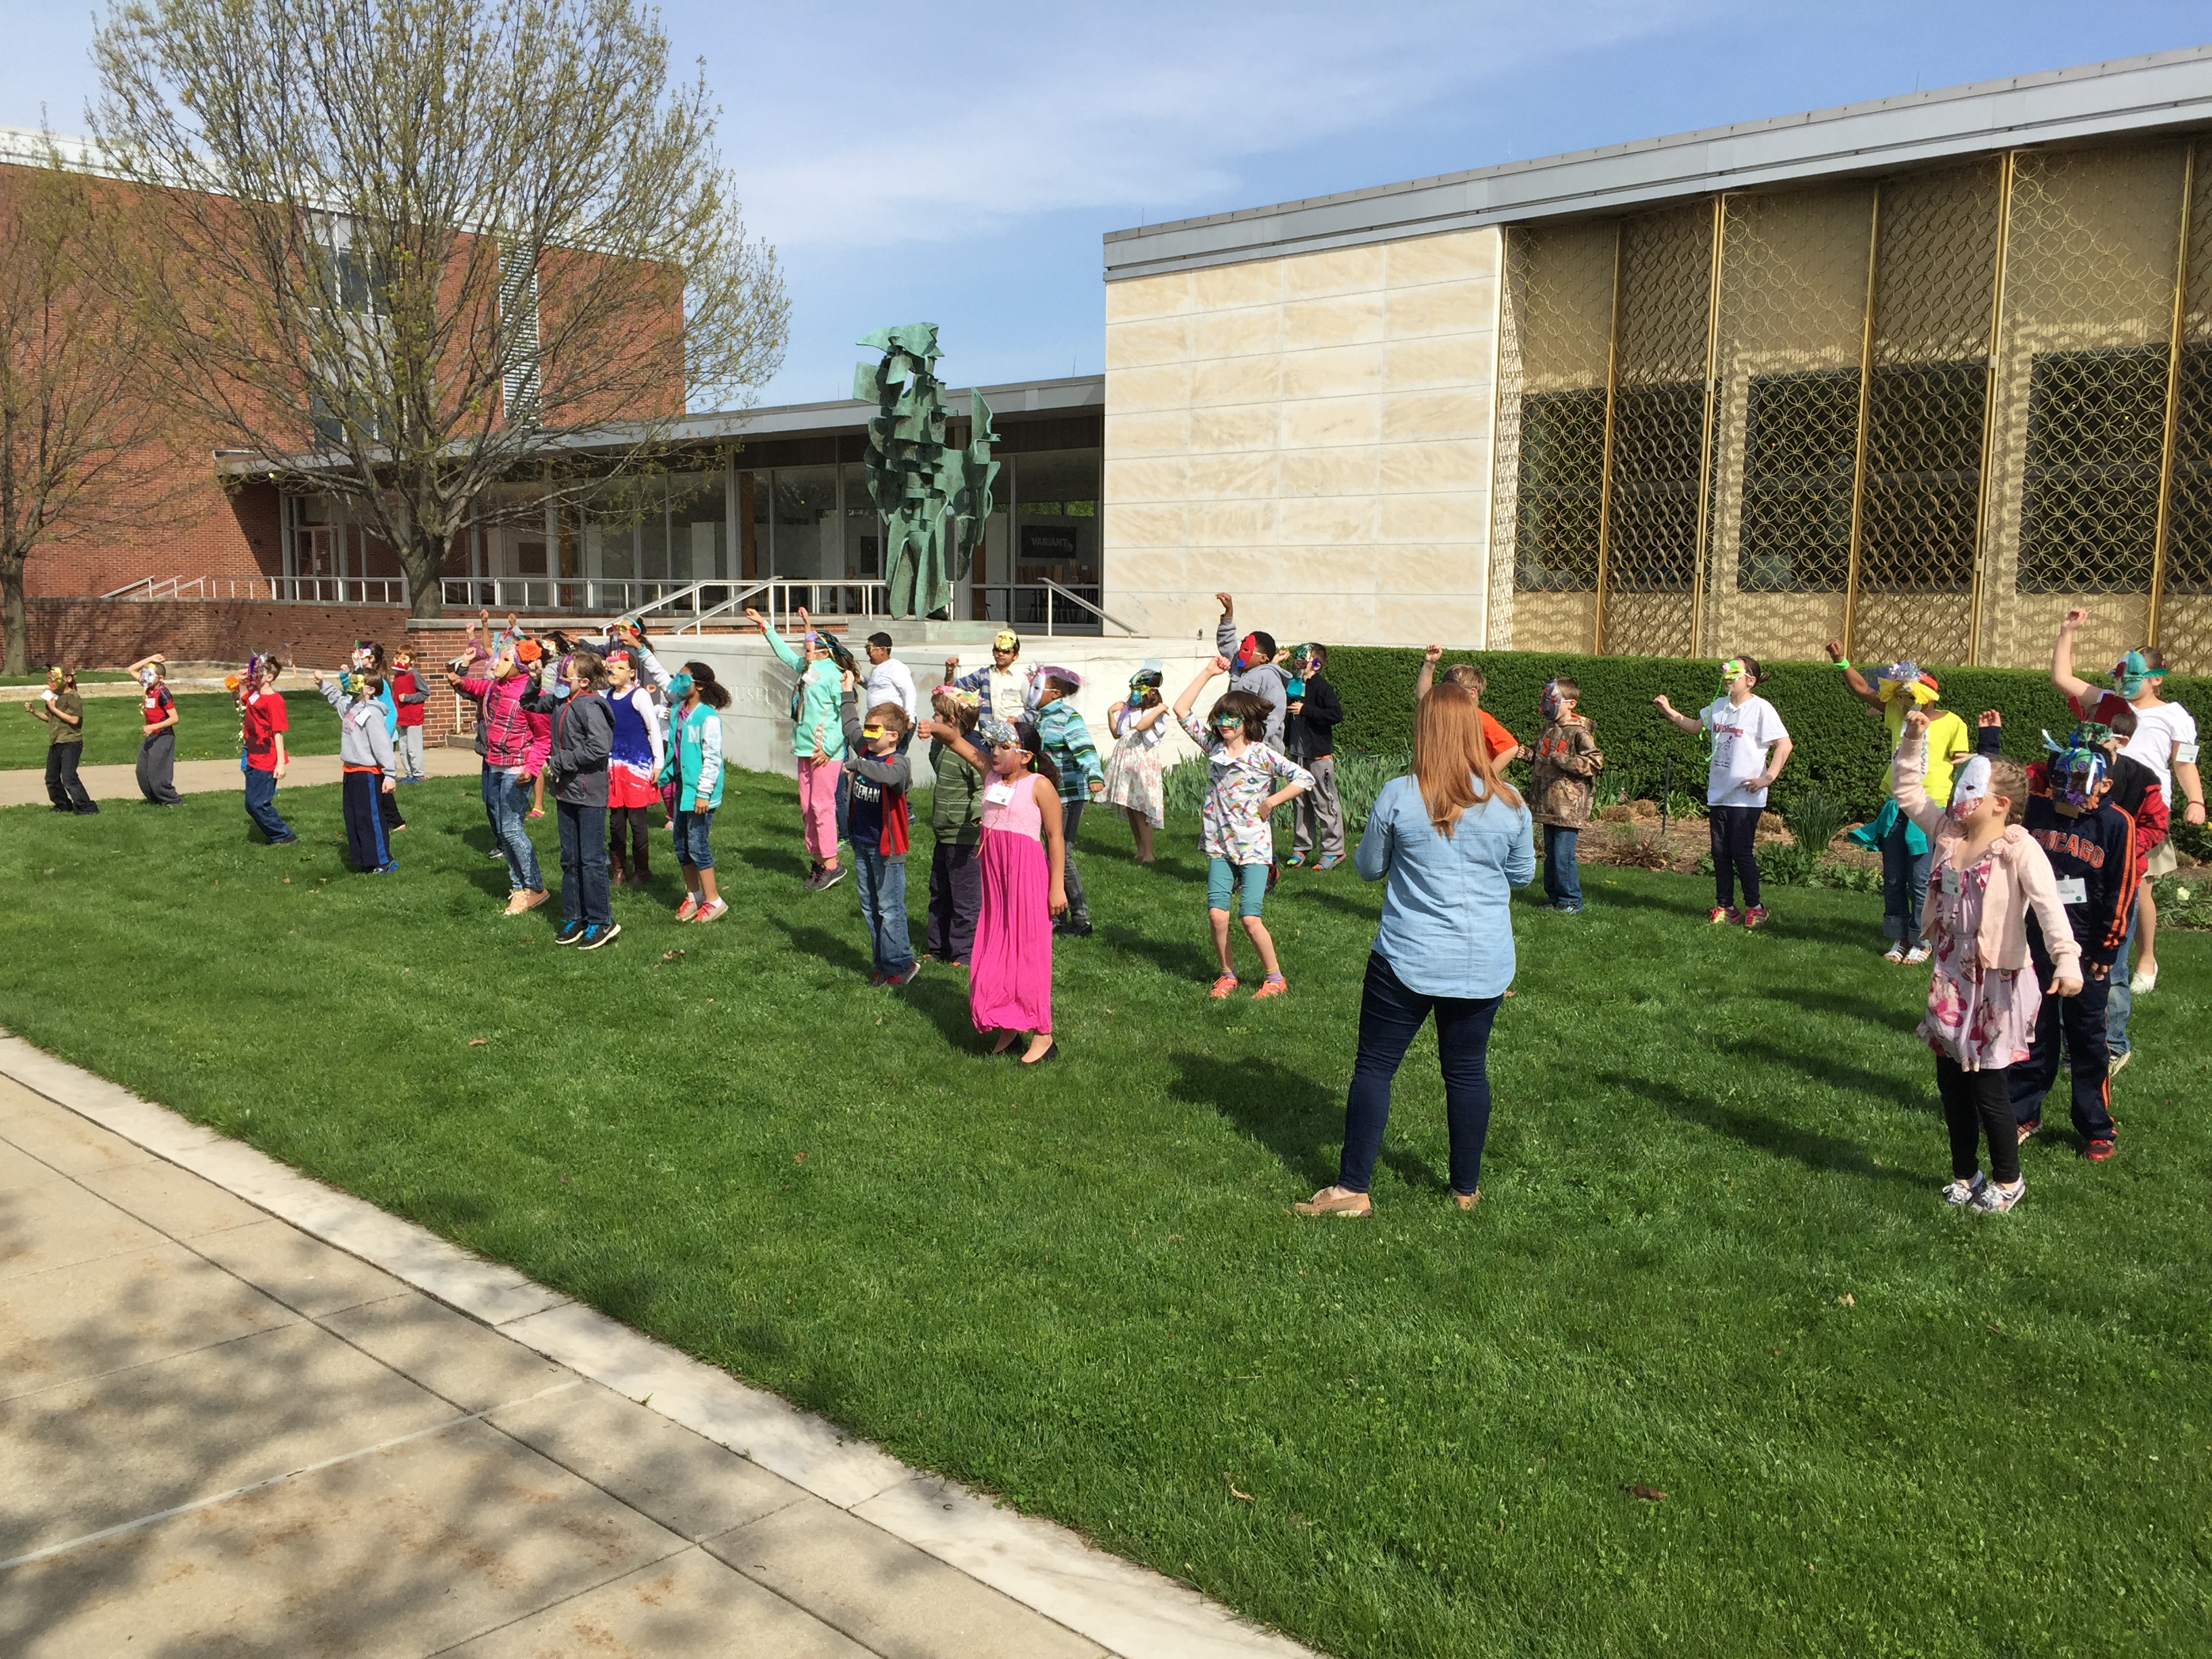 KAM-WAM students from Robeson and Thomas Paine Elementary schools sing "Everything Is Awesome!" from the LEGO' Movie on the lawn in front of Krannert Art Museum